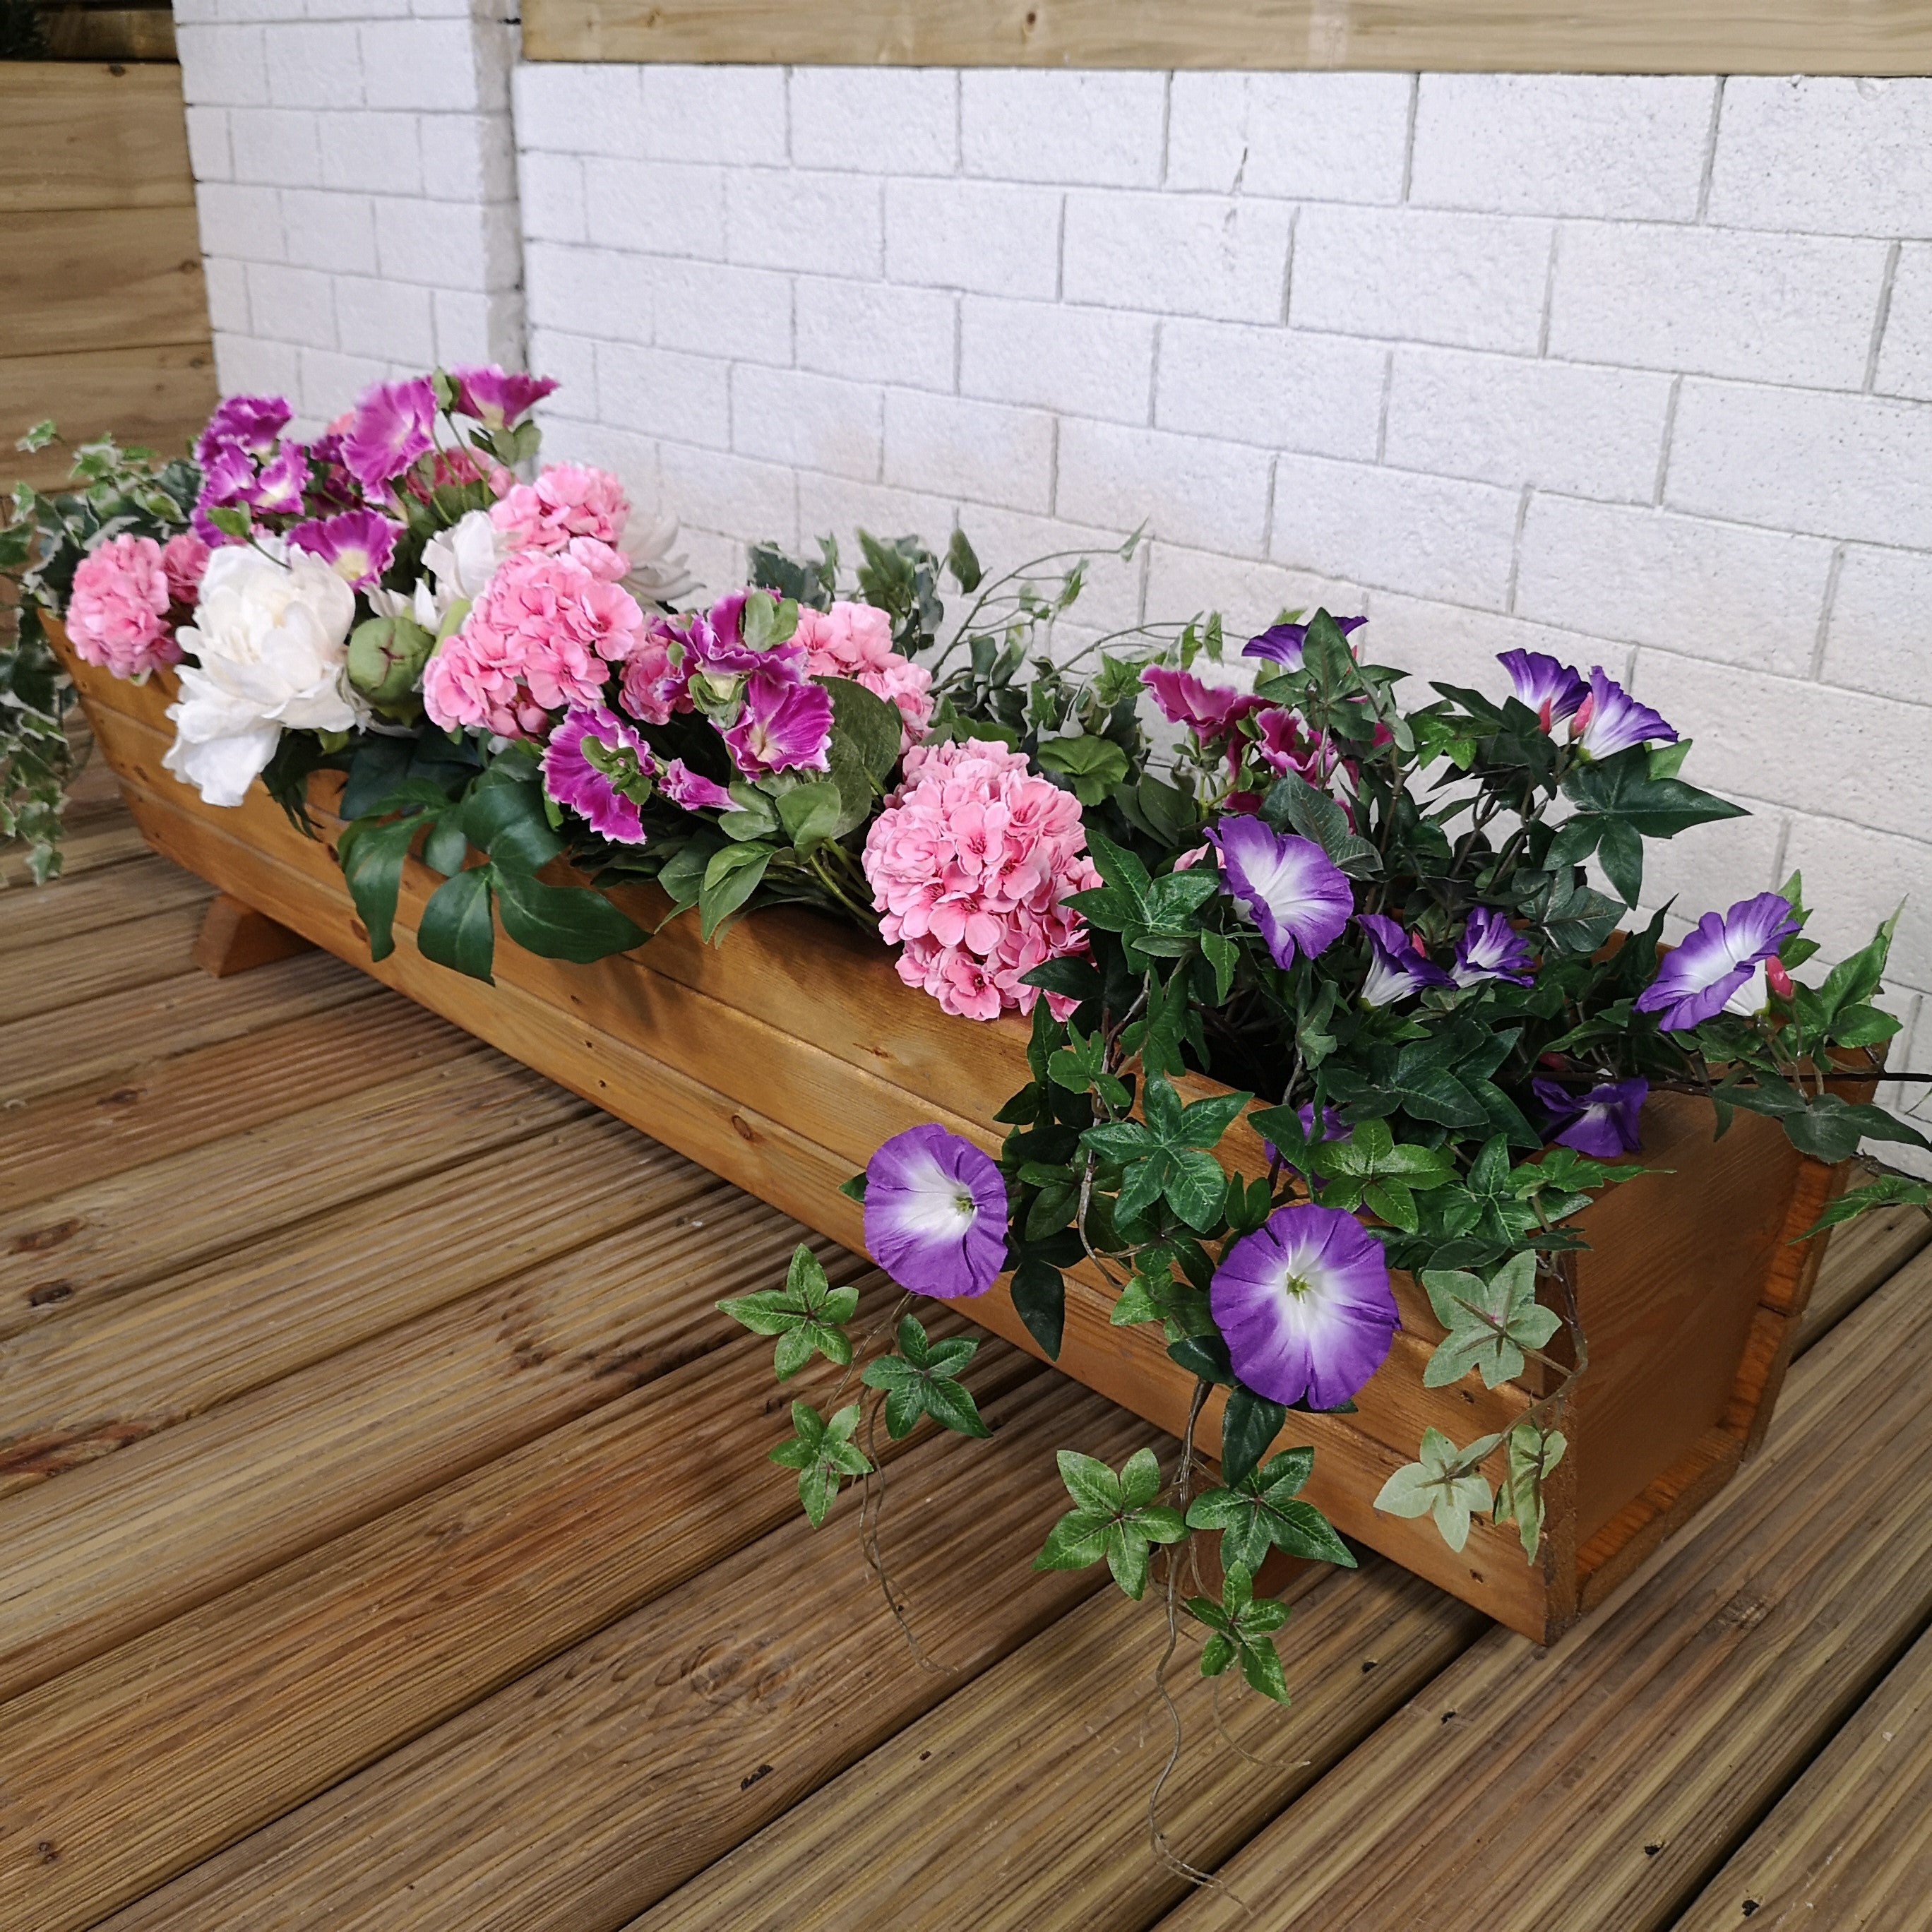 Tom Chambers Hand Made 87cm x 28cm Traditional Rustic Wooden Large Garden Trough Flower Bed Planter